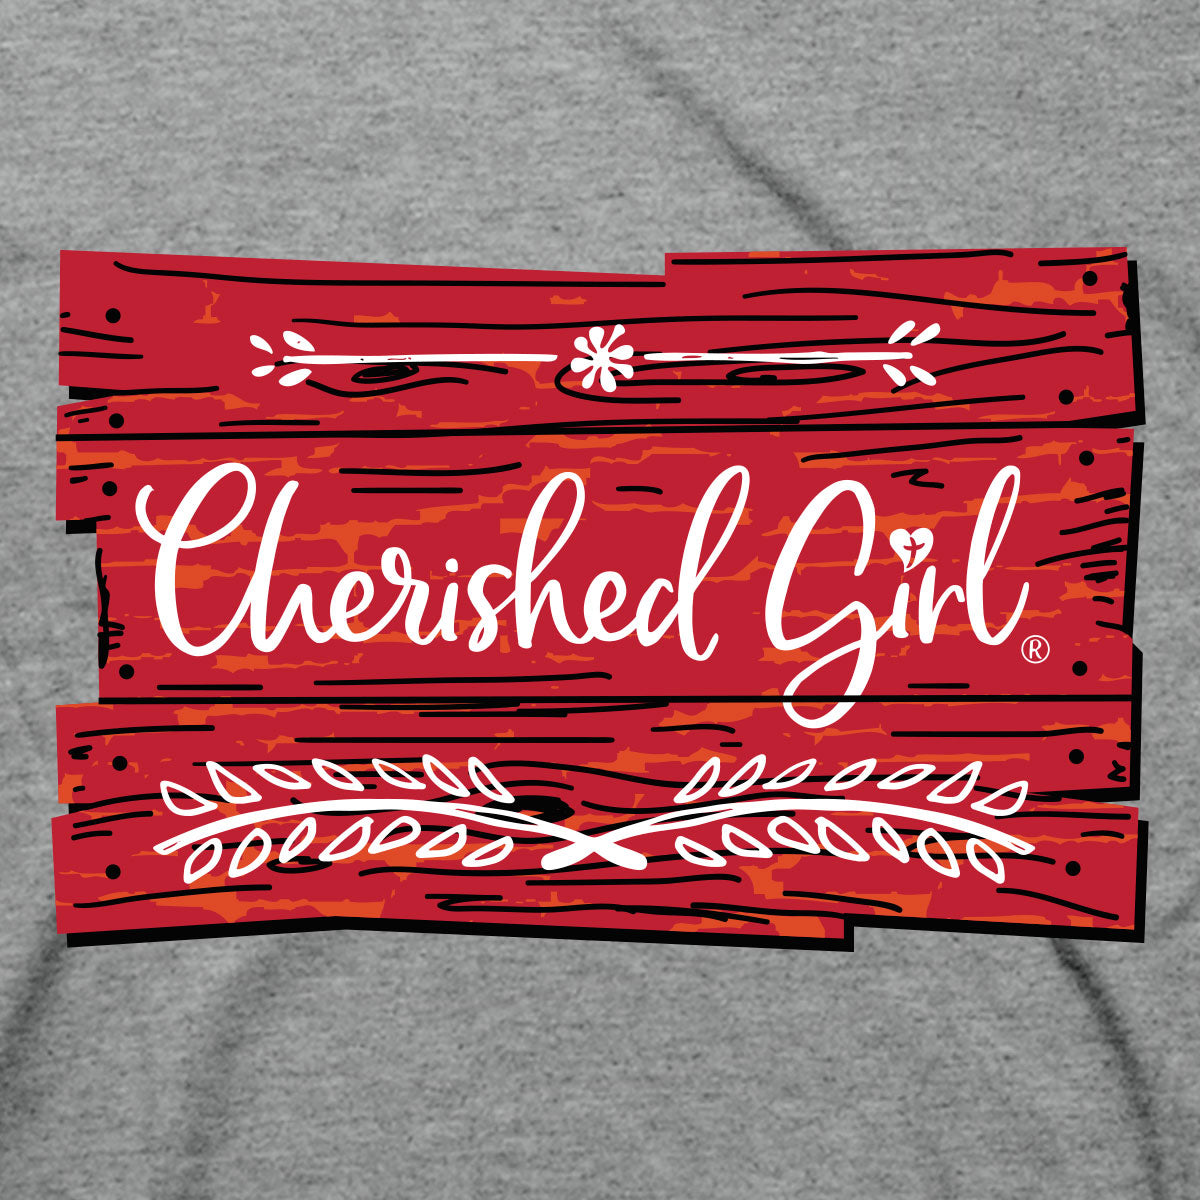 Cherished Girl Womens T-Shirt Reap What We Sow